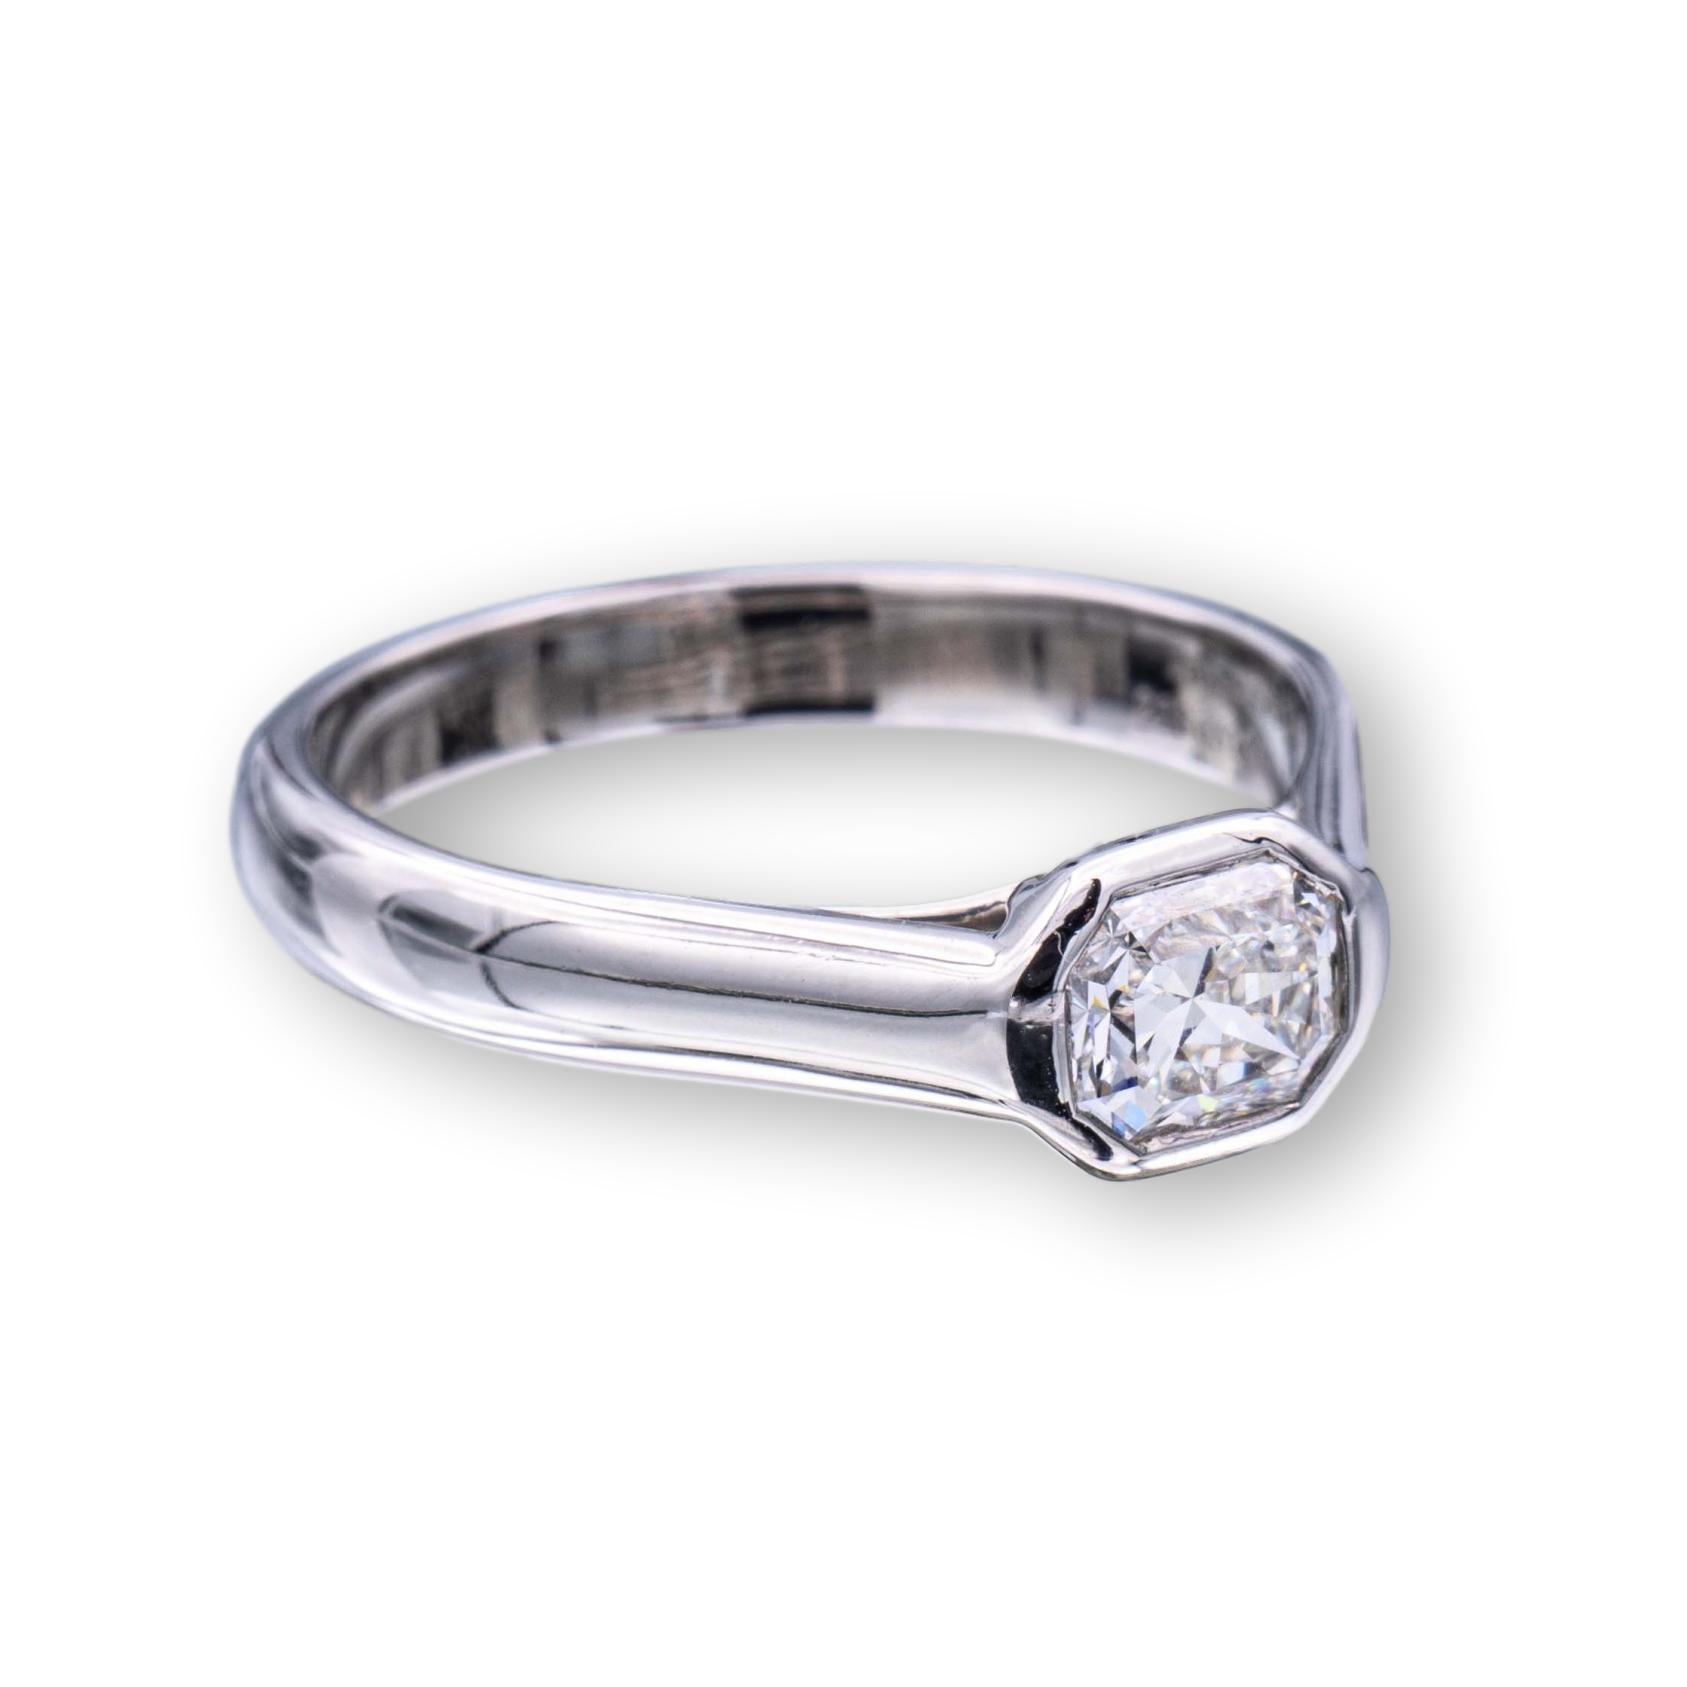 Tiffany & Co. diamond ring finely crafted in platinum with a 0.58 carat, with a high quality F color, VS1 clarity 